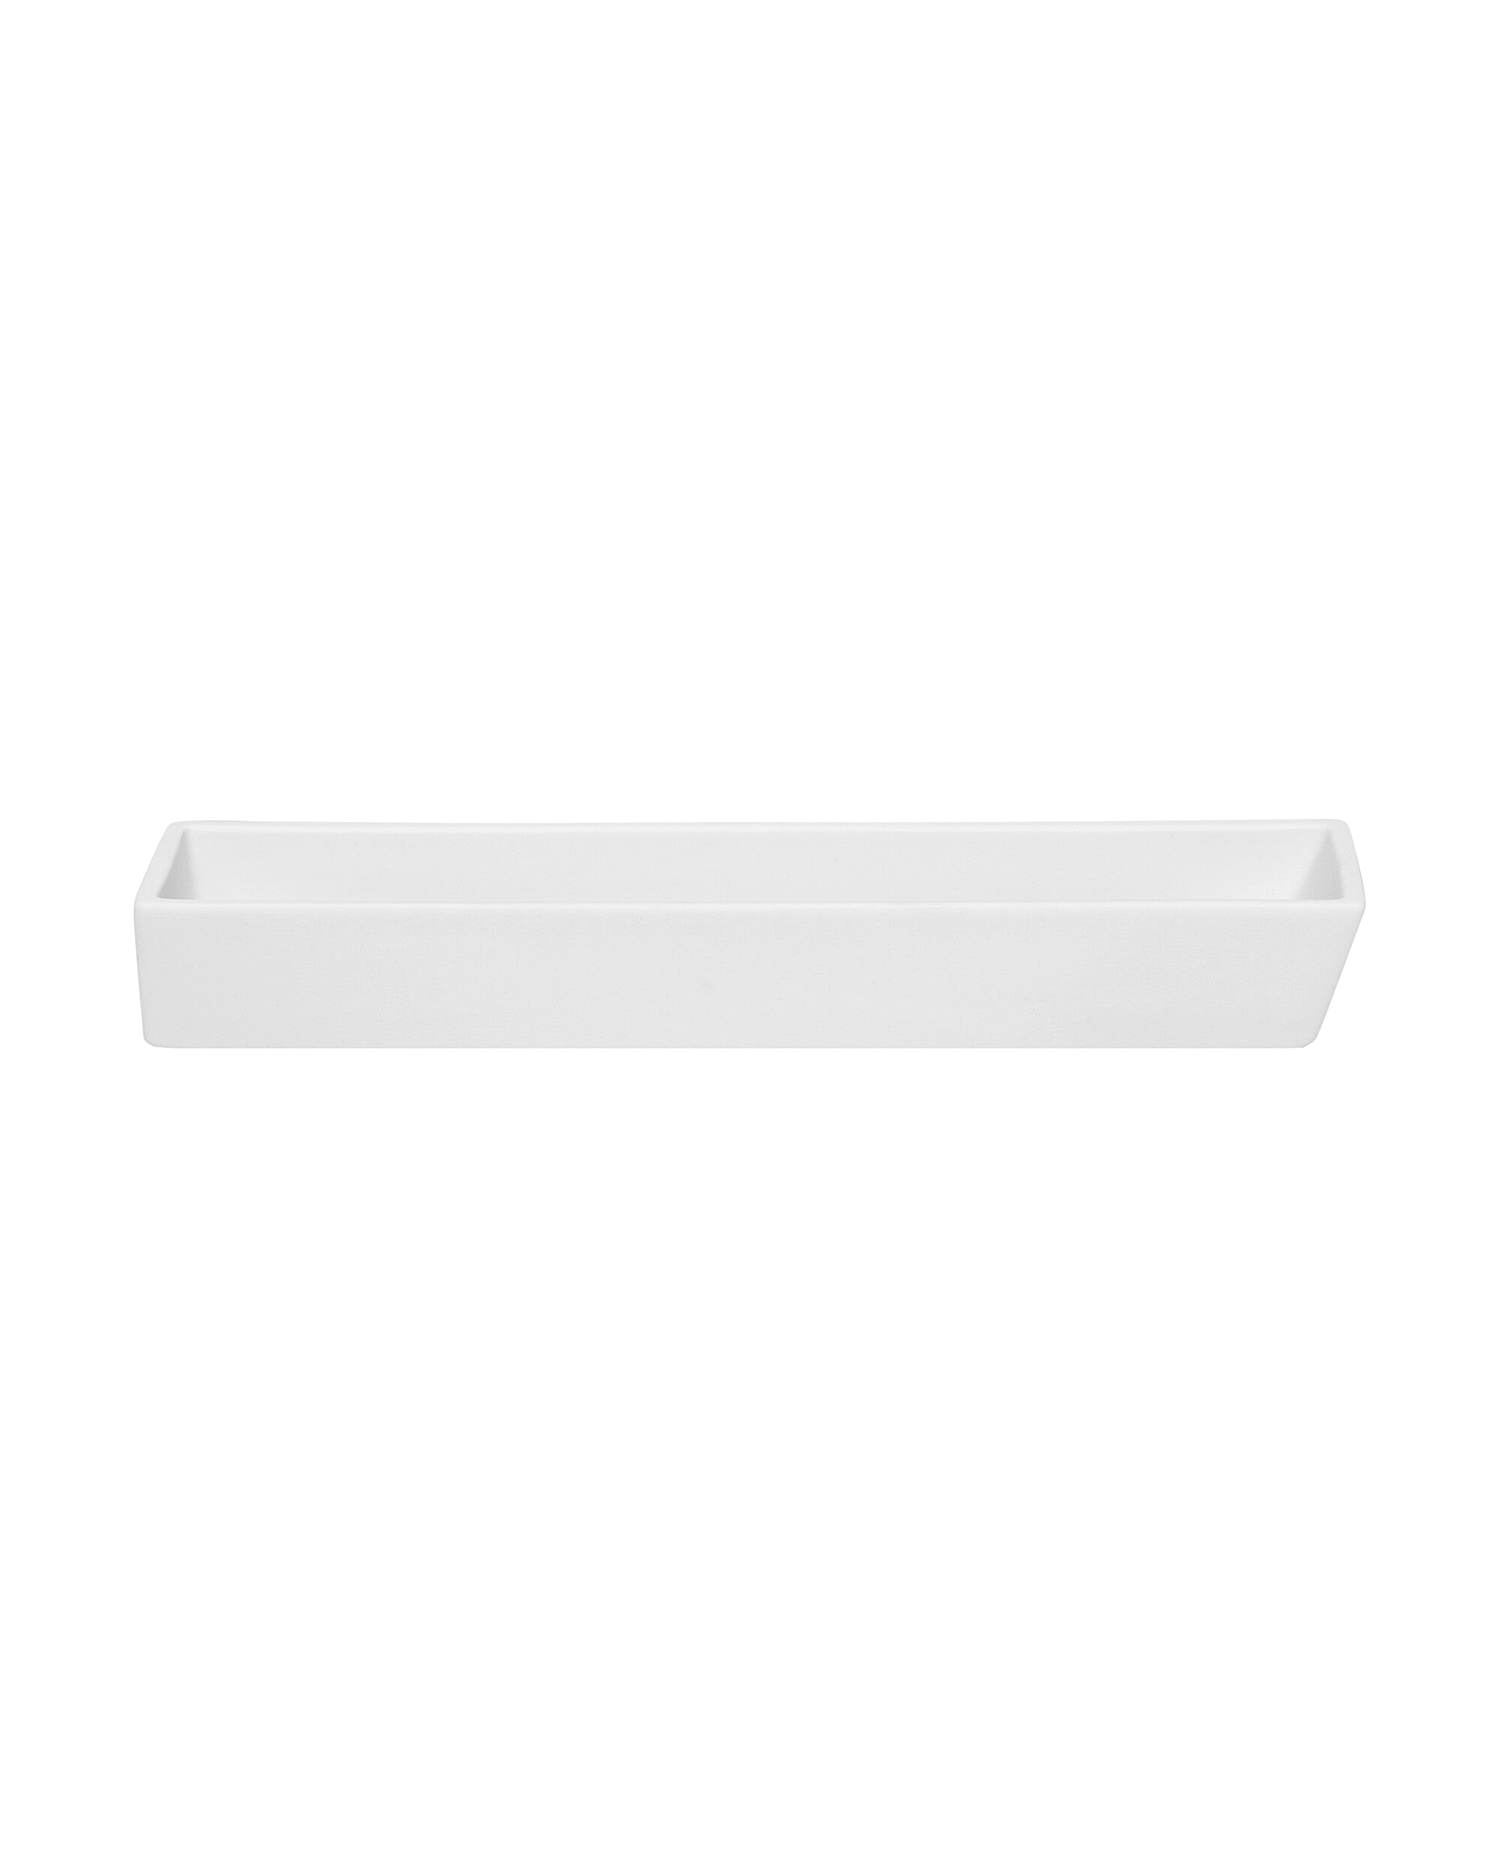 CI Incence Tray - White